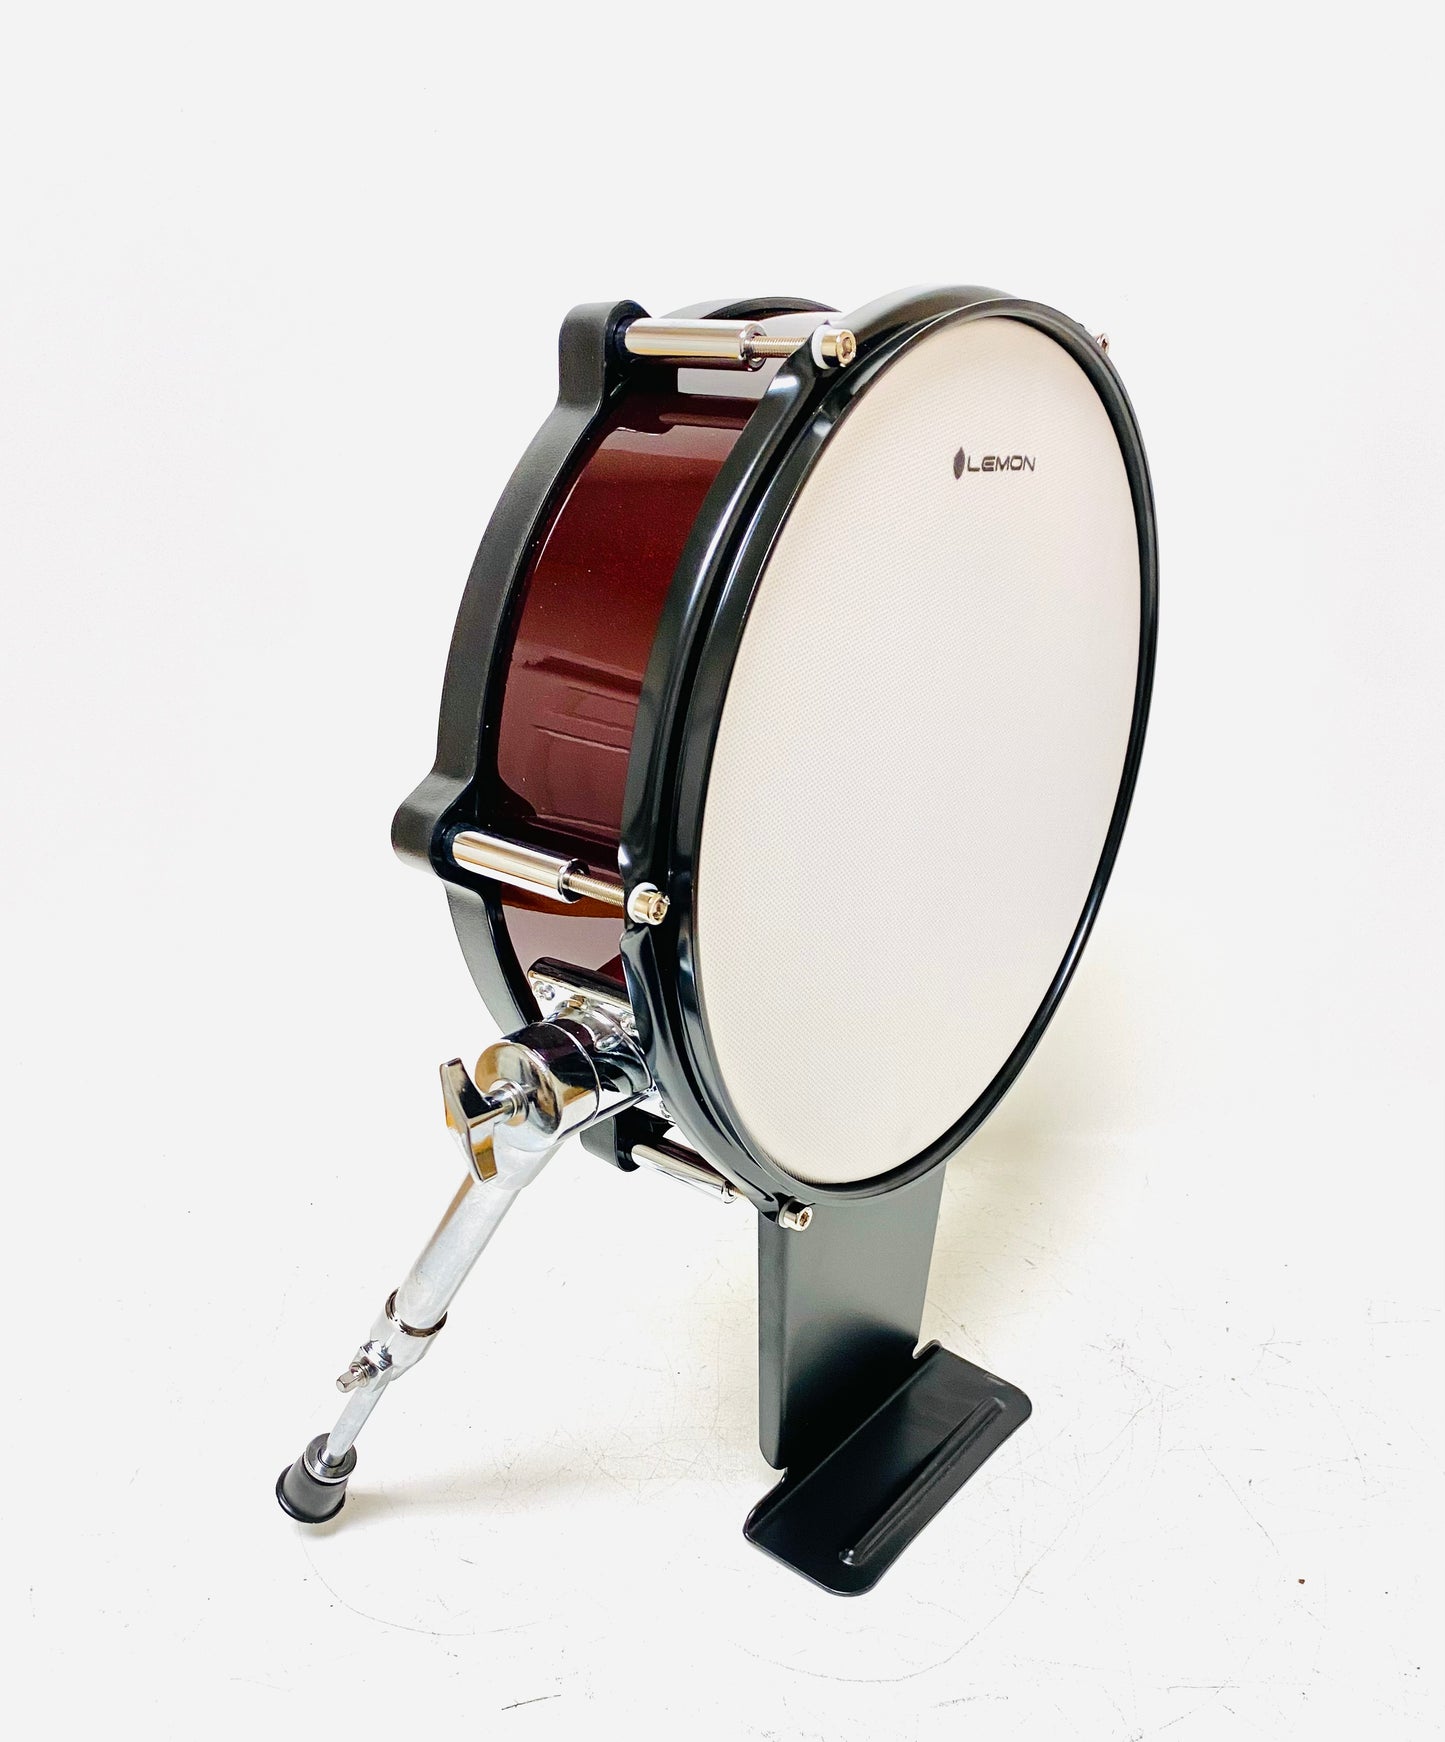 Lemon 12” Black RED Bass Kick Drum for Roland and Alesis Kit